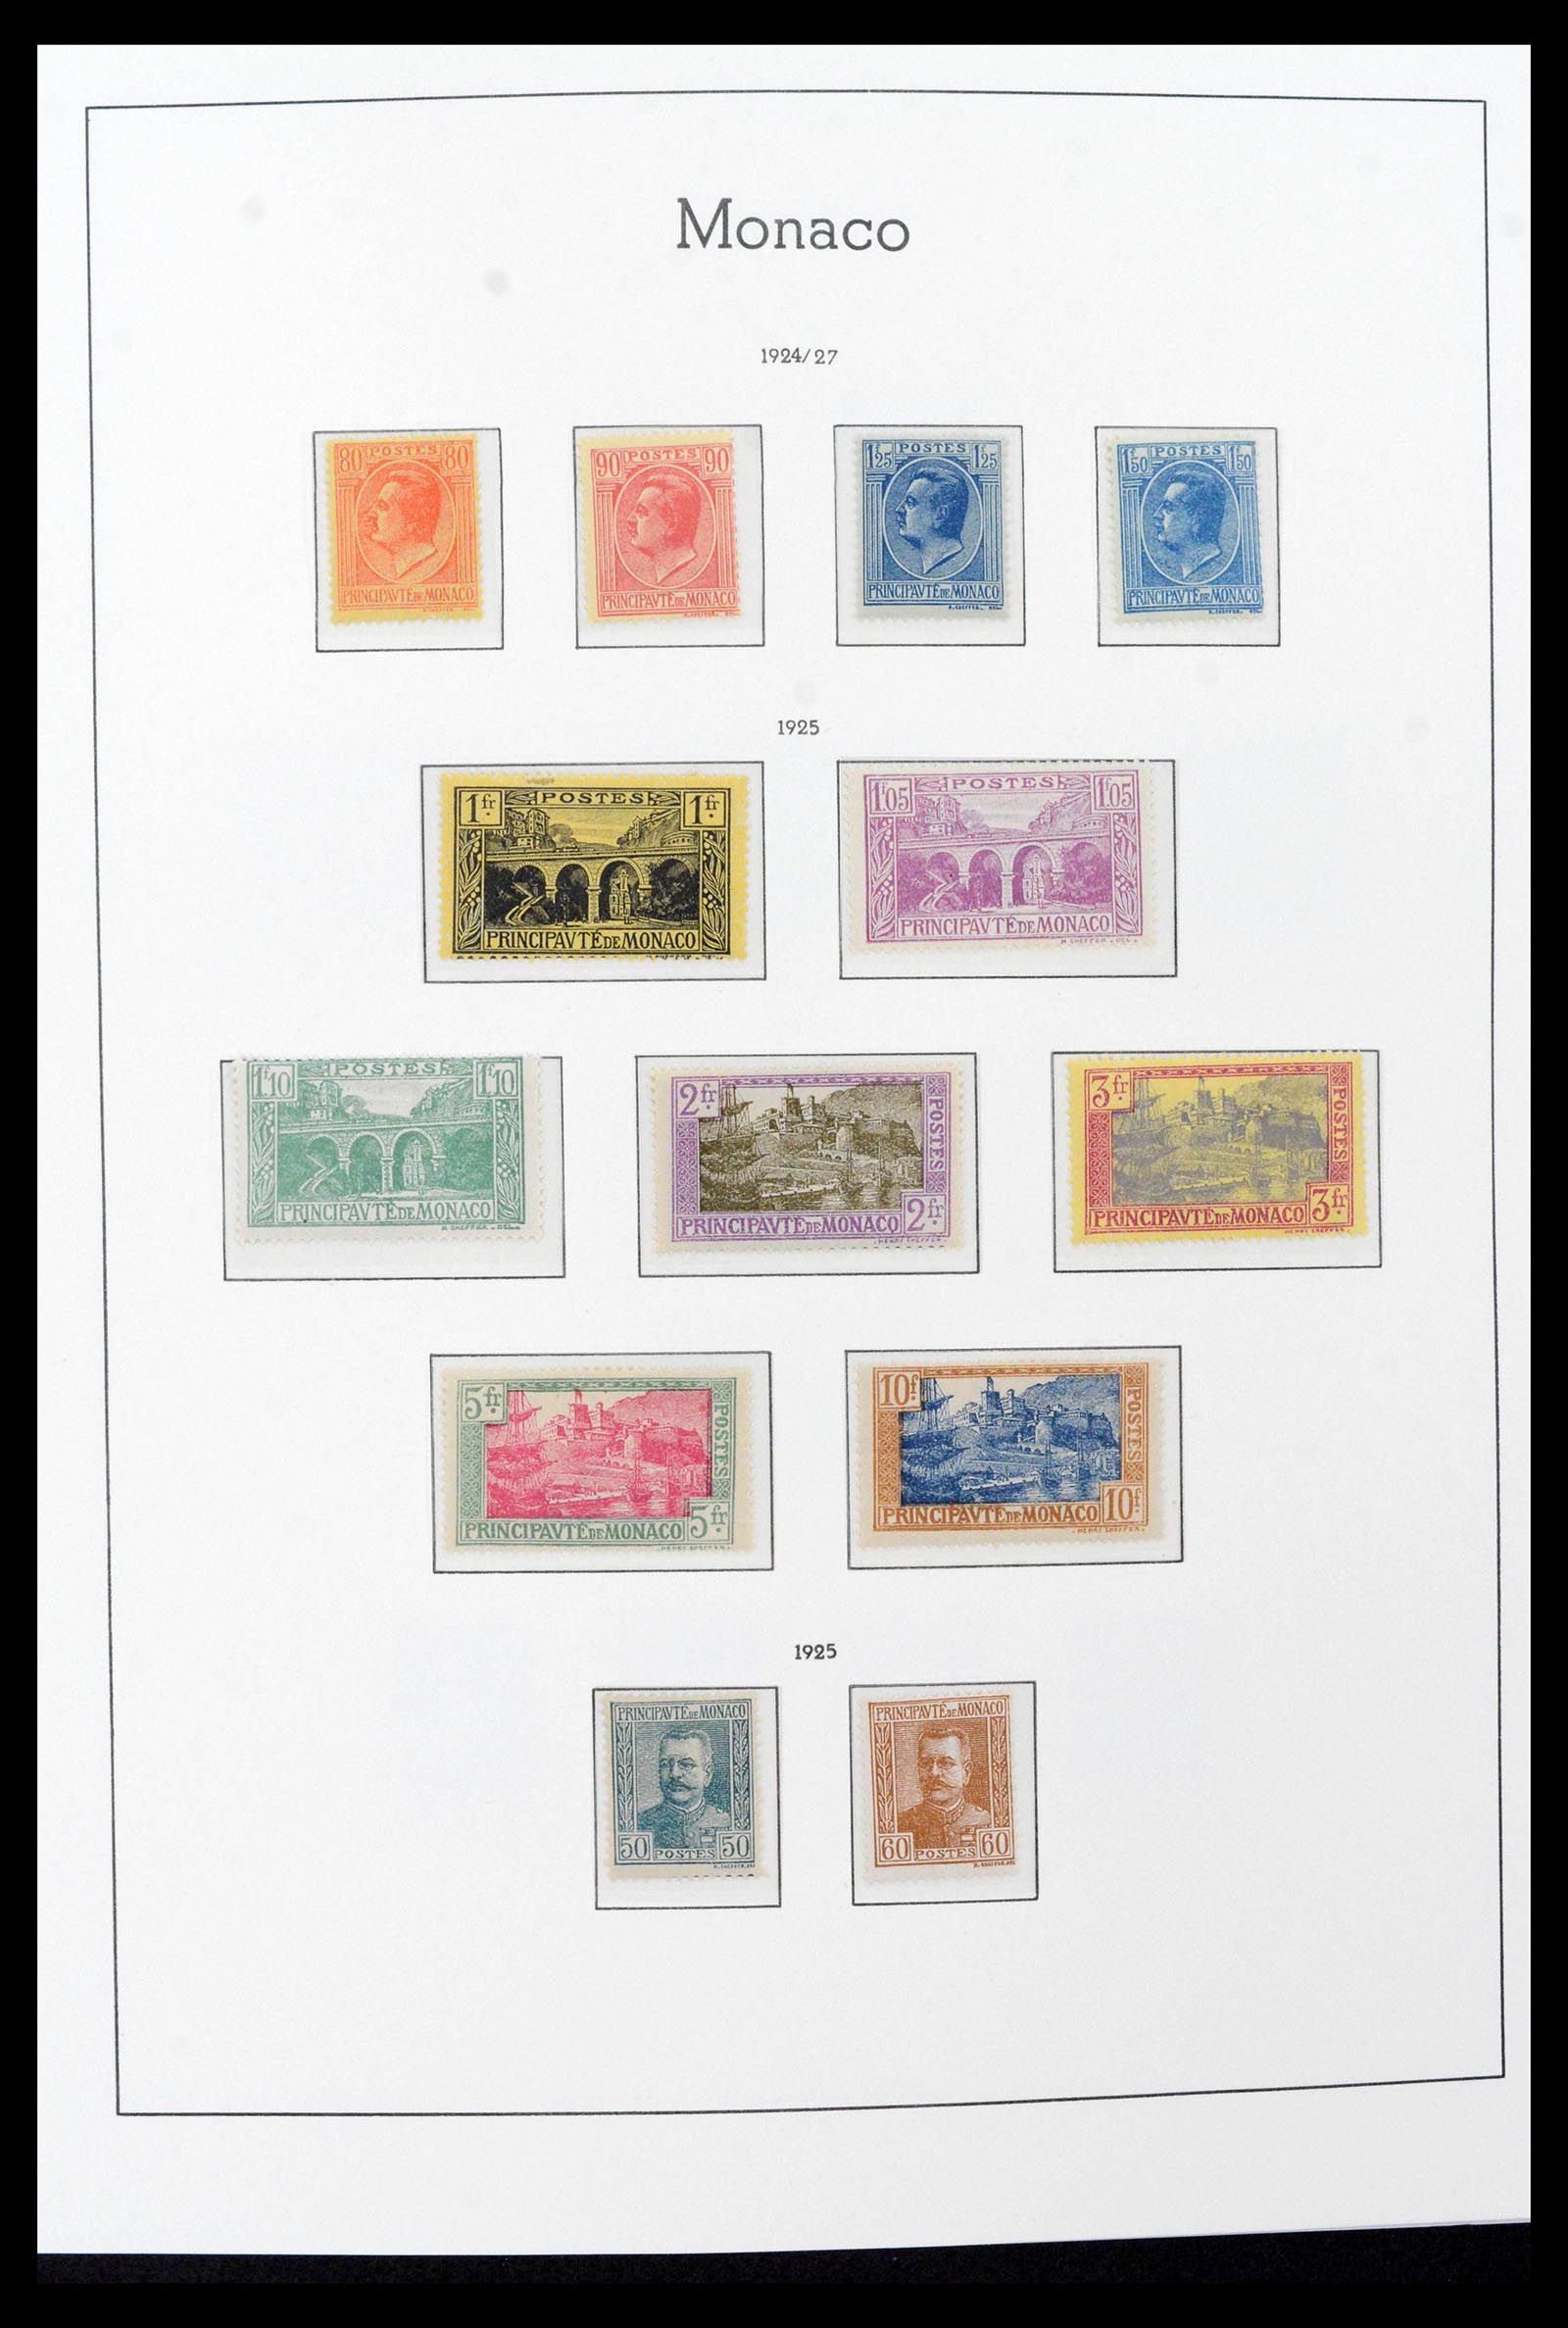 39390 0008 - Stamp collection 39390 Monaco complete 1885-1990.